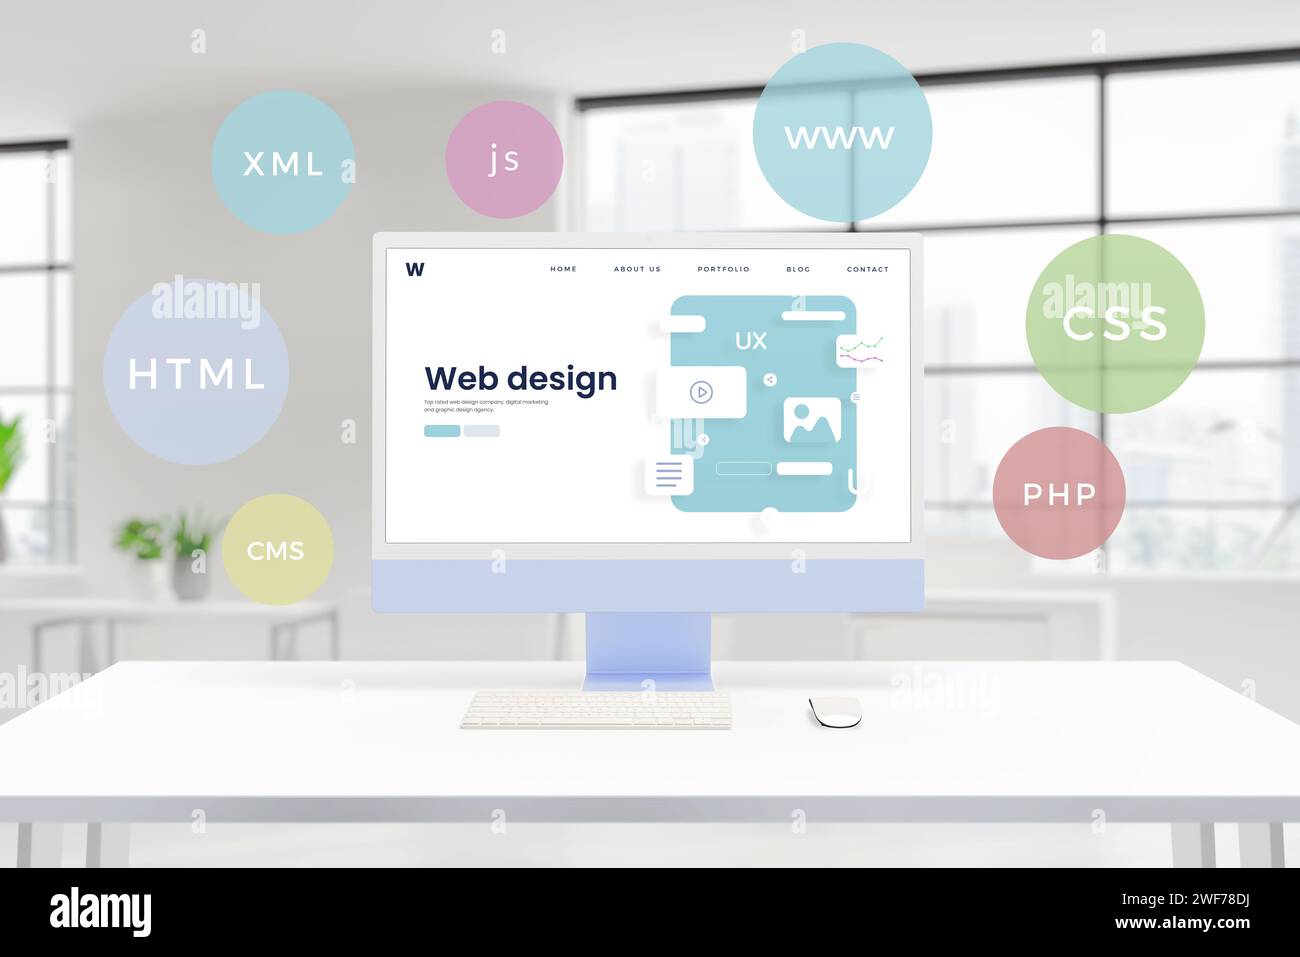 Computer display showcases a conceptual web design studio page with layout elements. Floating balloons feature HTML, PHP, CSS, XML, JS, CMS technologi Stock Photo